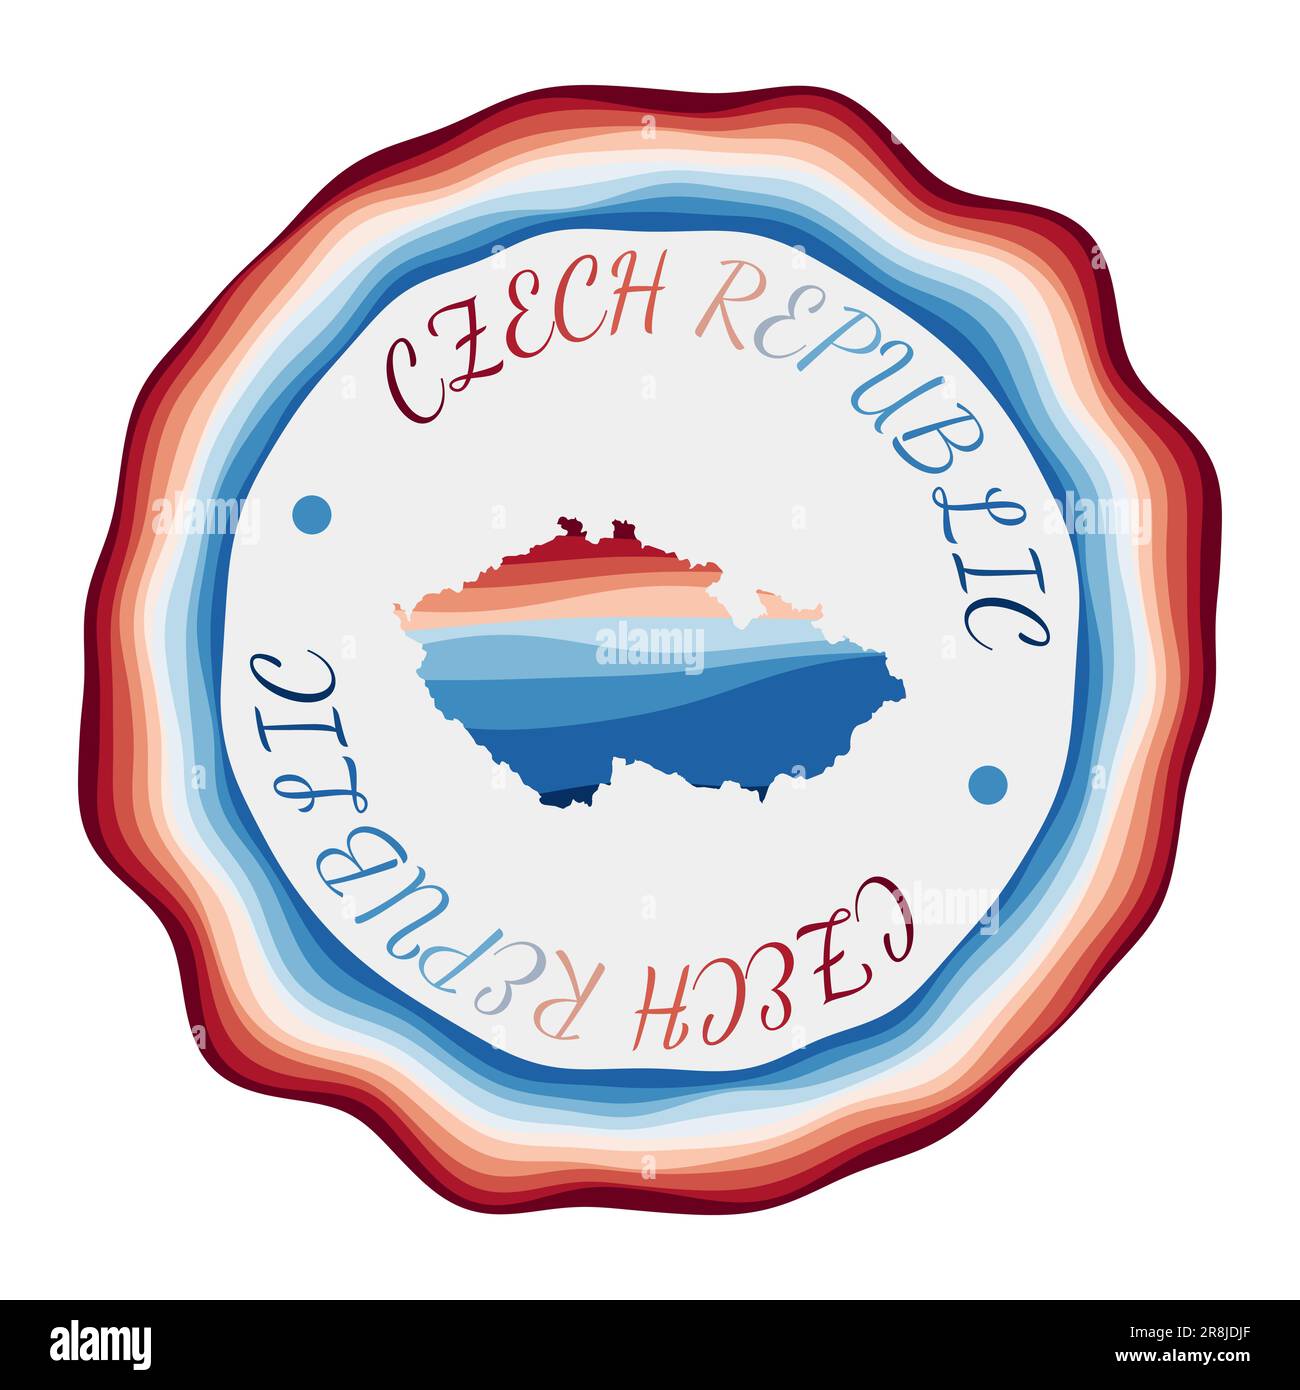 Czech Republic badge. Map of the country with beautiful geometric waves and vibrant red blue frame. Vivid round Czech Republic logo. Vector illustrati Stock Vector